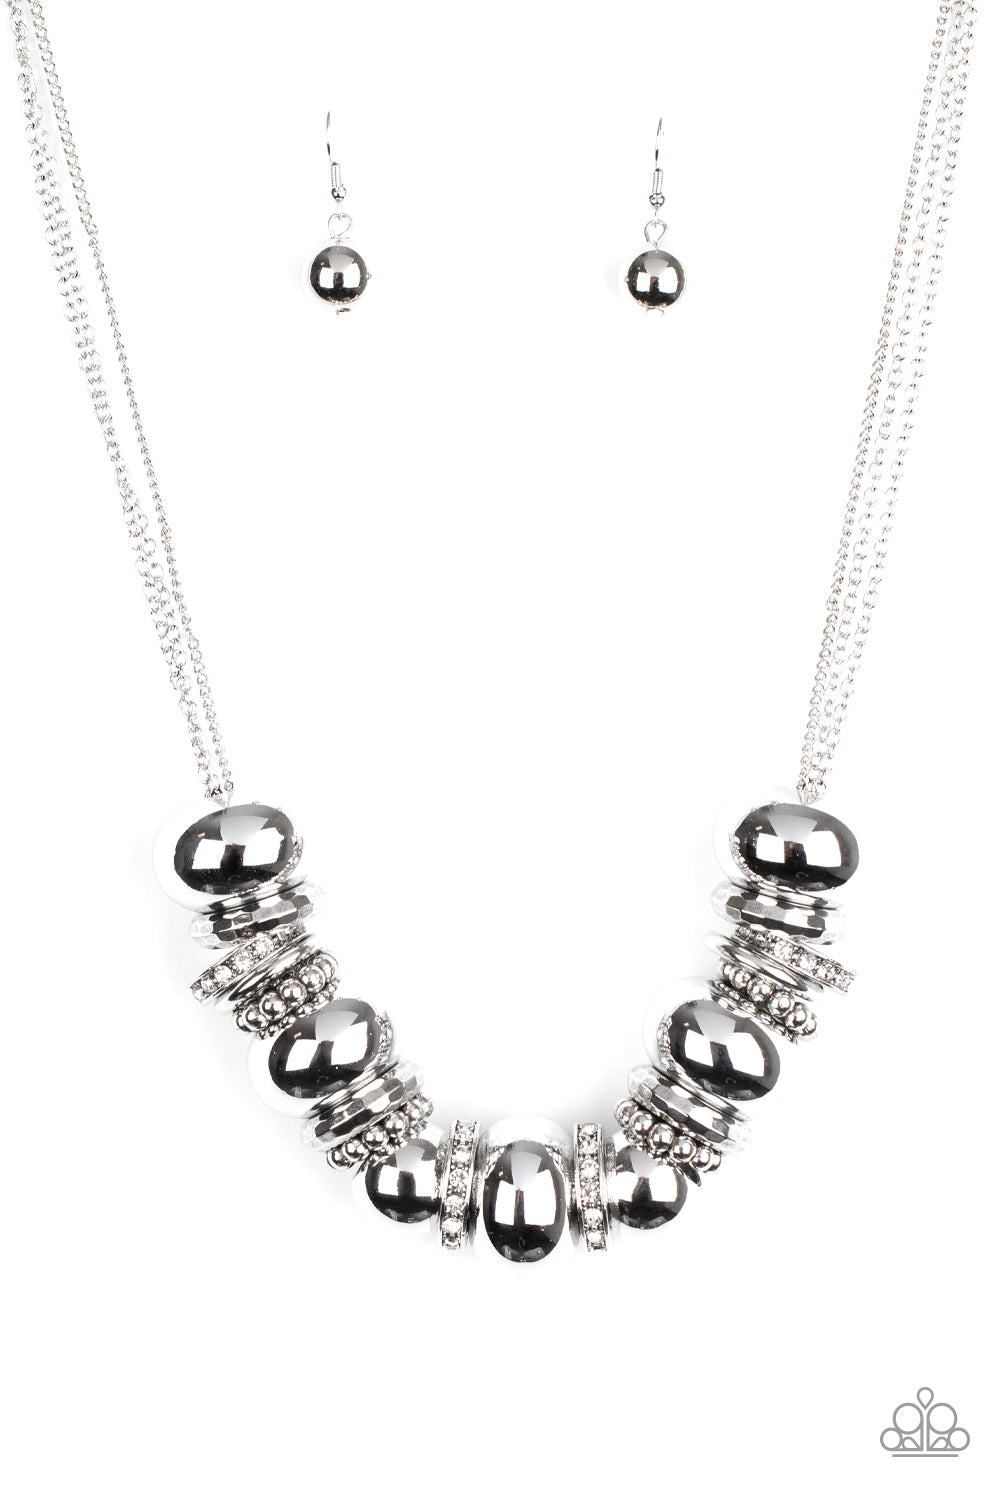 Only The Brave White Necklace - Paparazzi Accessories